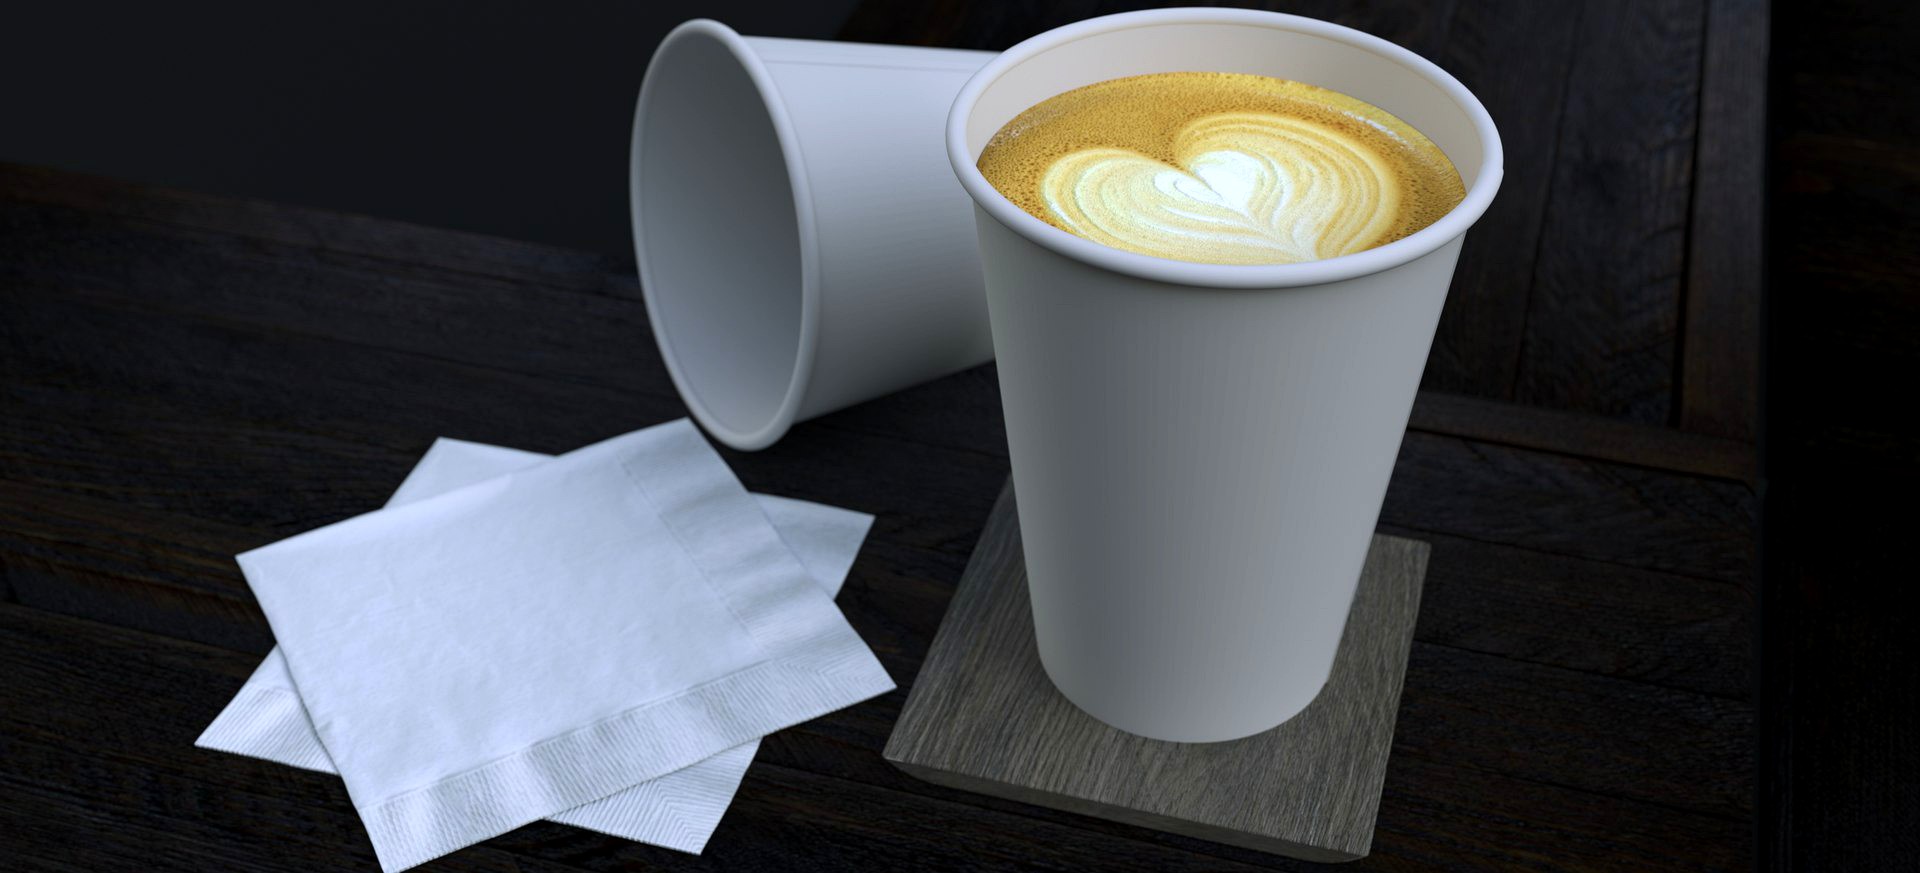 LATTE 12 OZ COFFEE CUP 2019 MAX2014